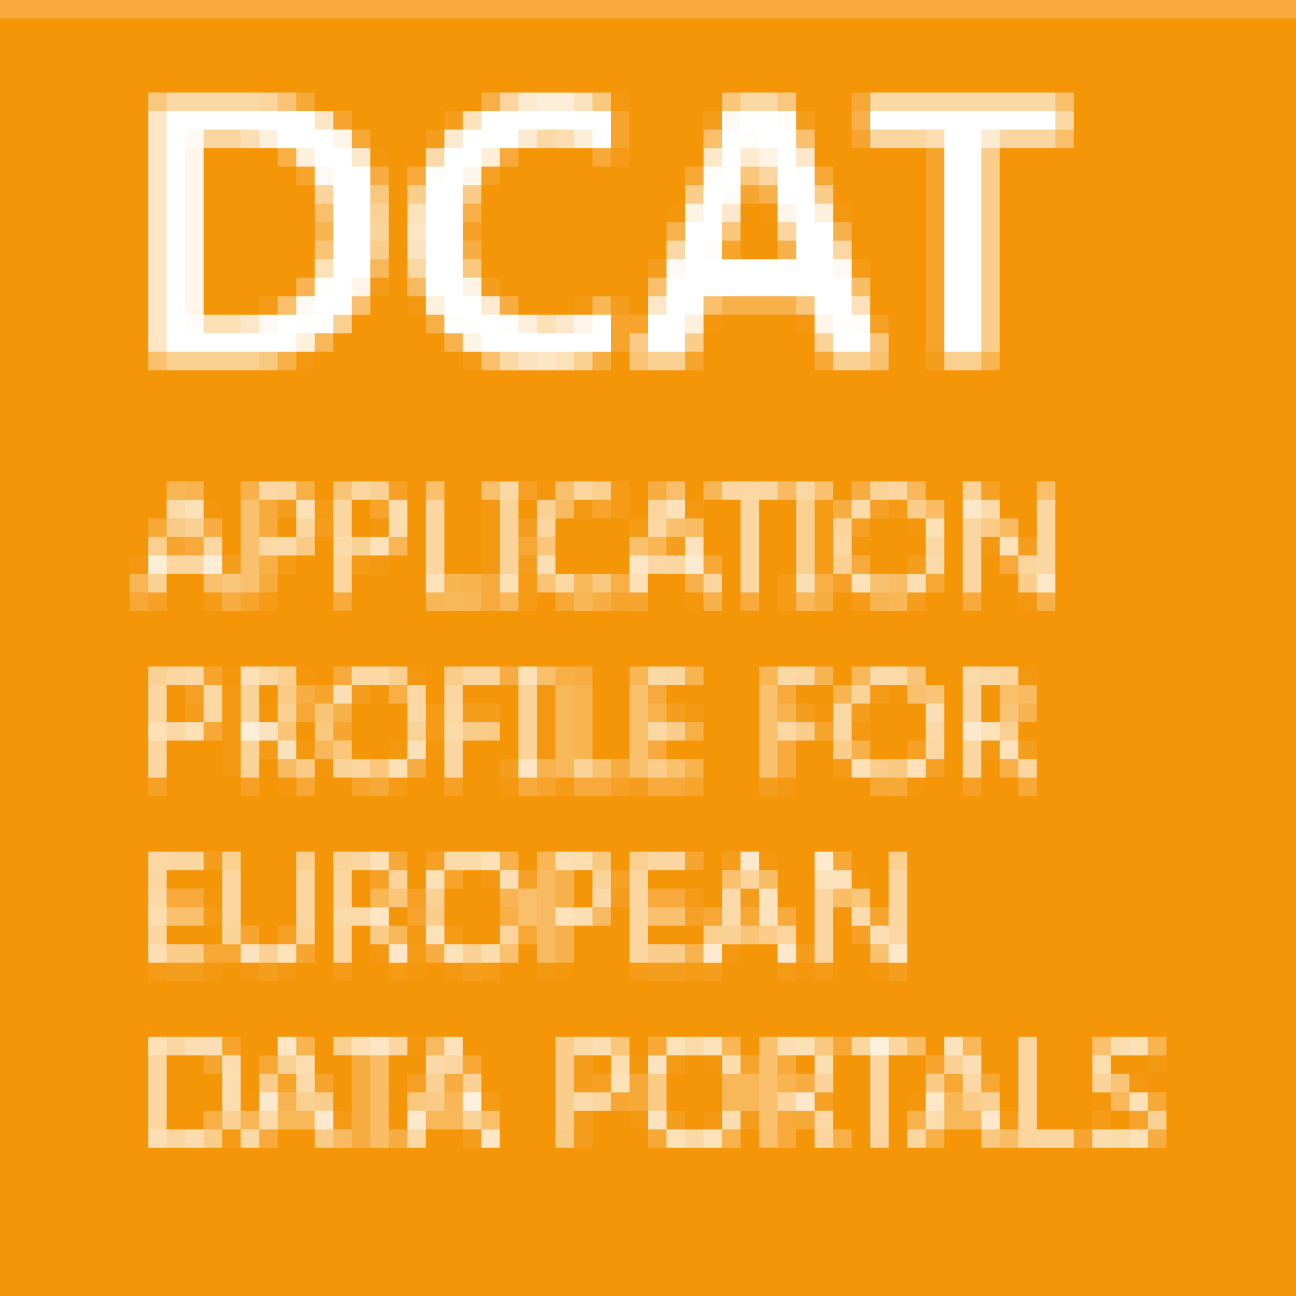 DCAT application profile for data portals in Europe logo